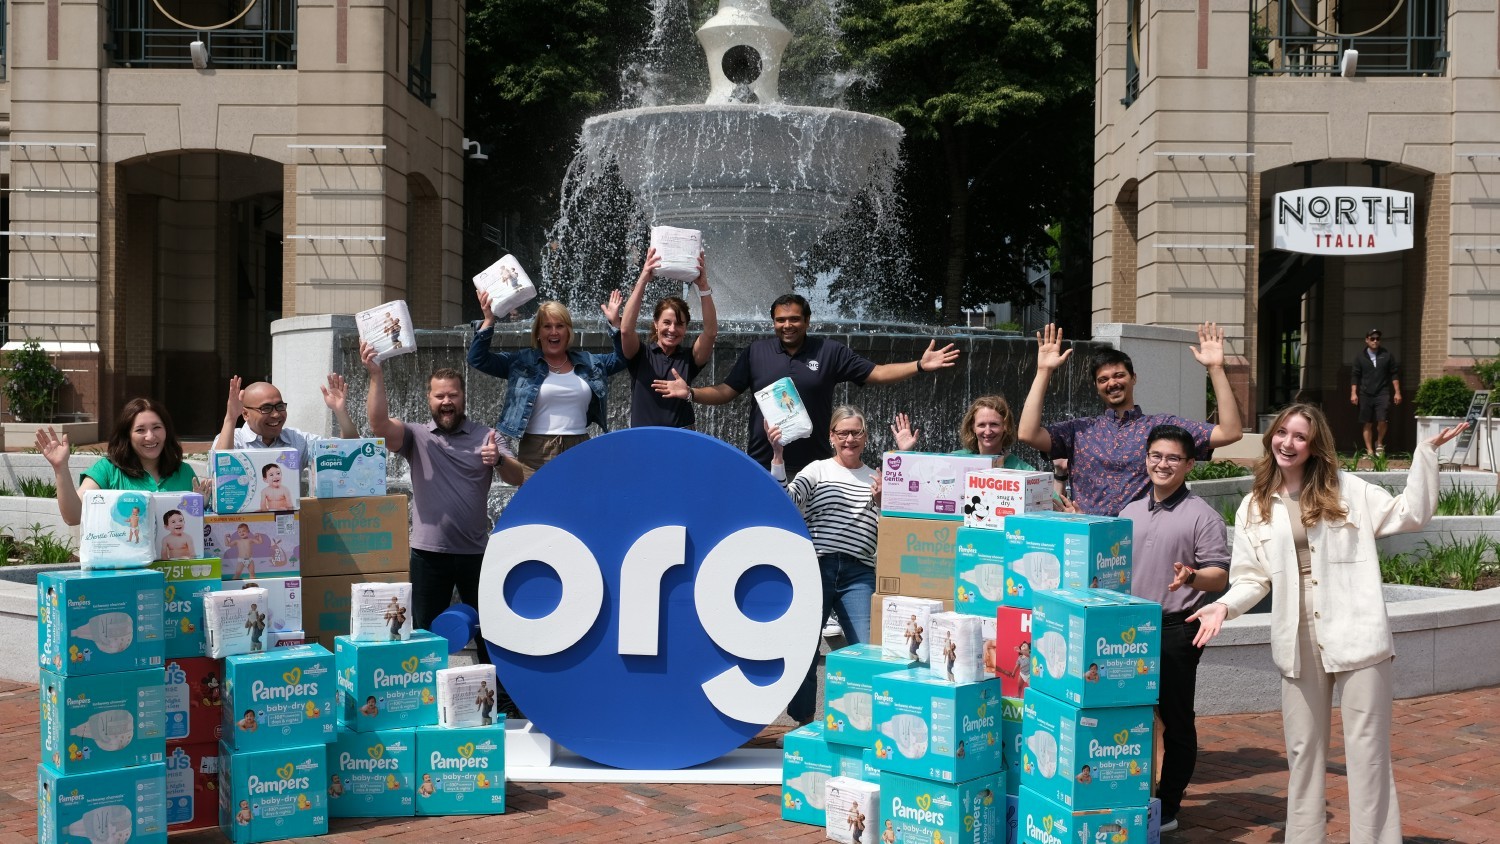 We care about giving back!  The team donated 3,000 diapers to a local charity as part of our Charitable Giving Program.